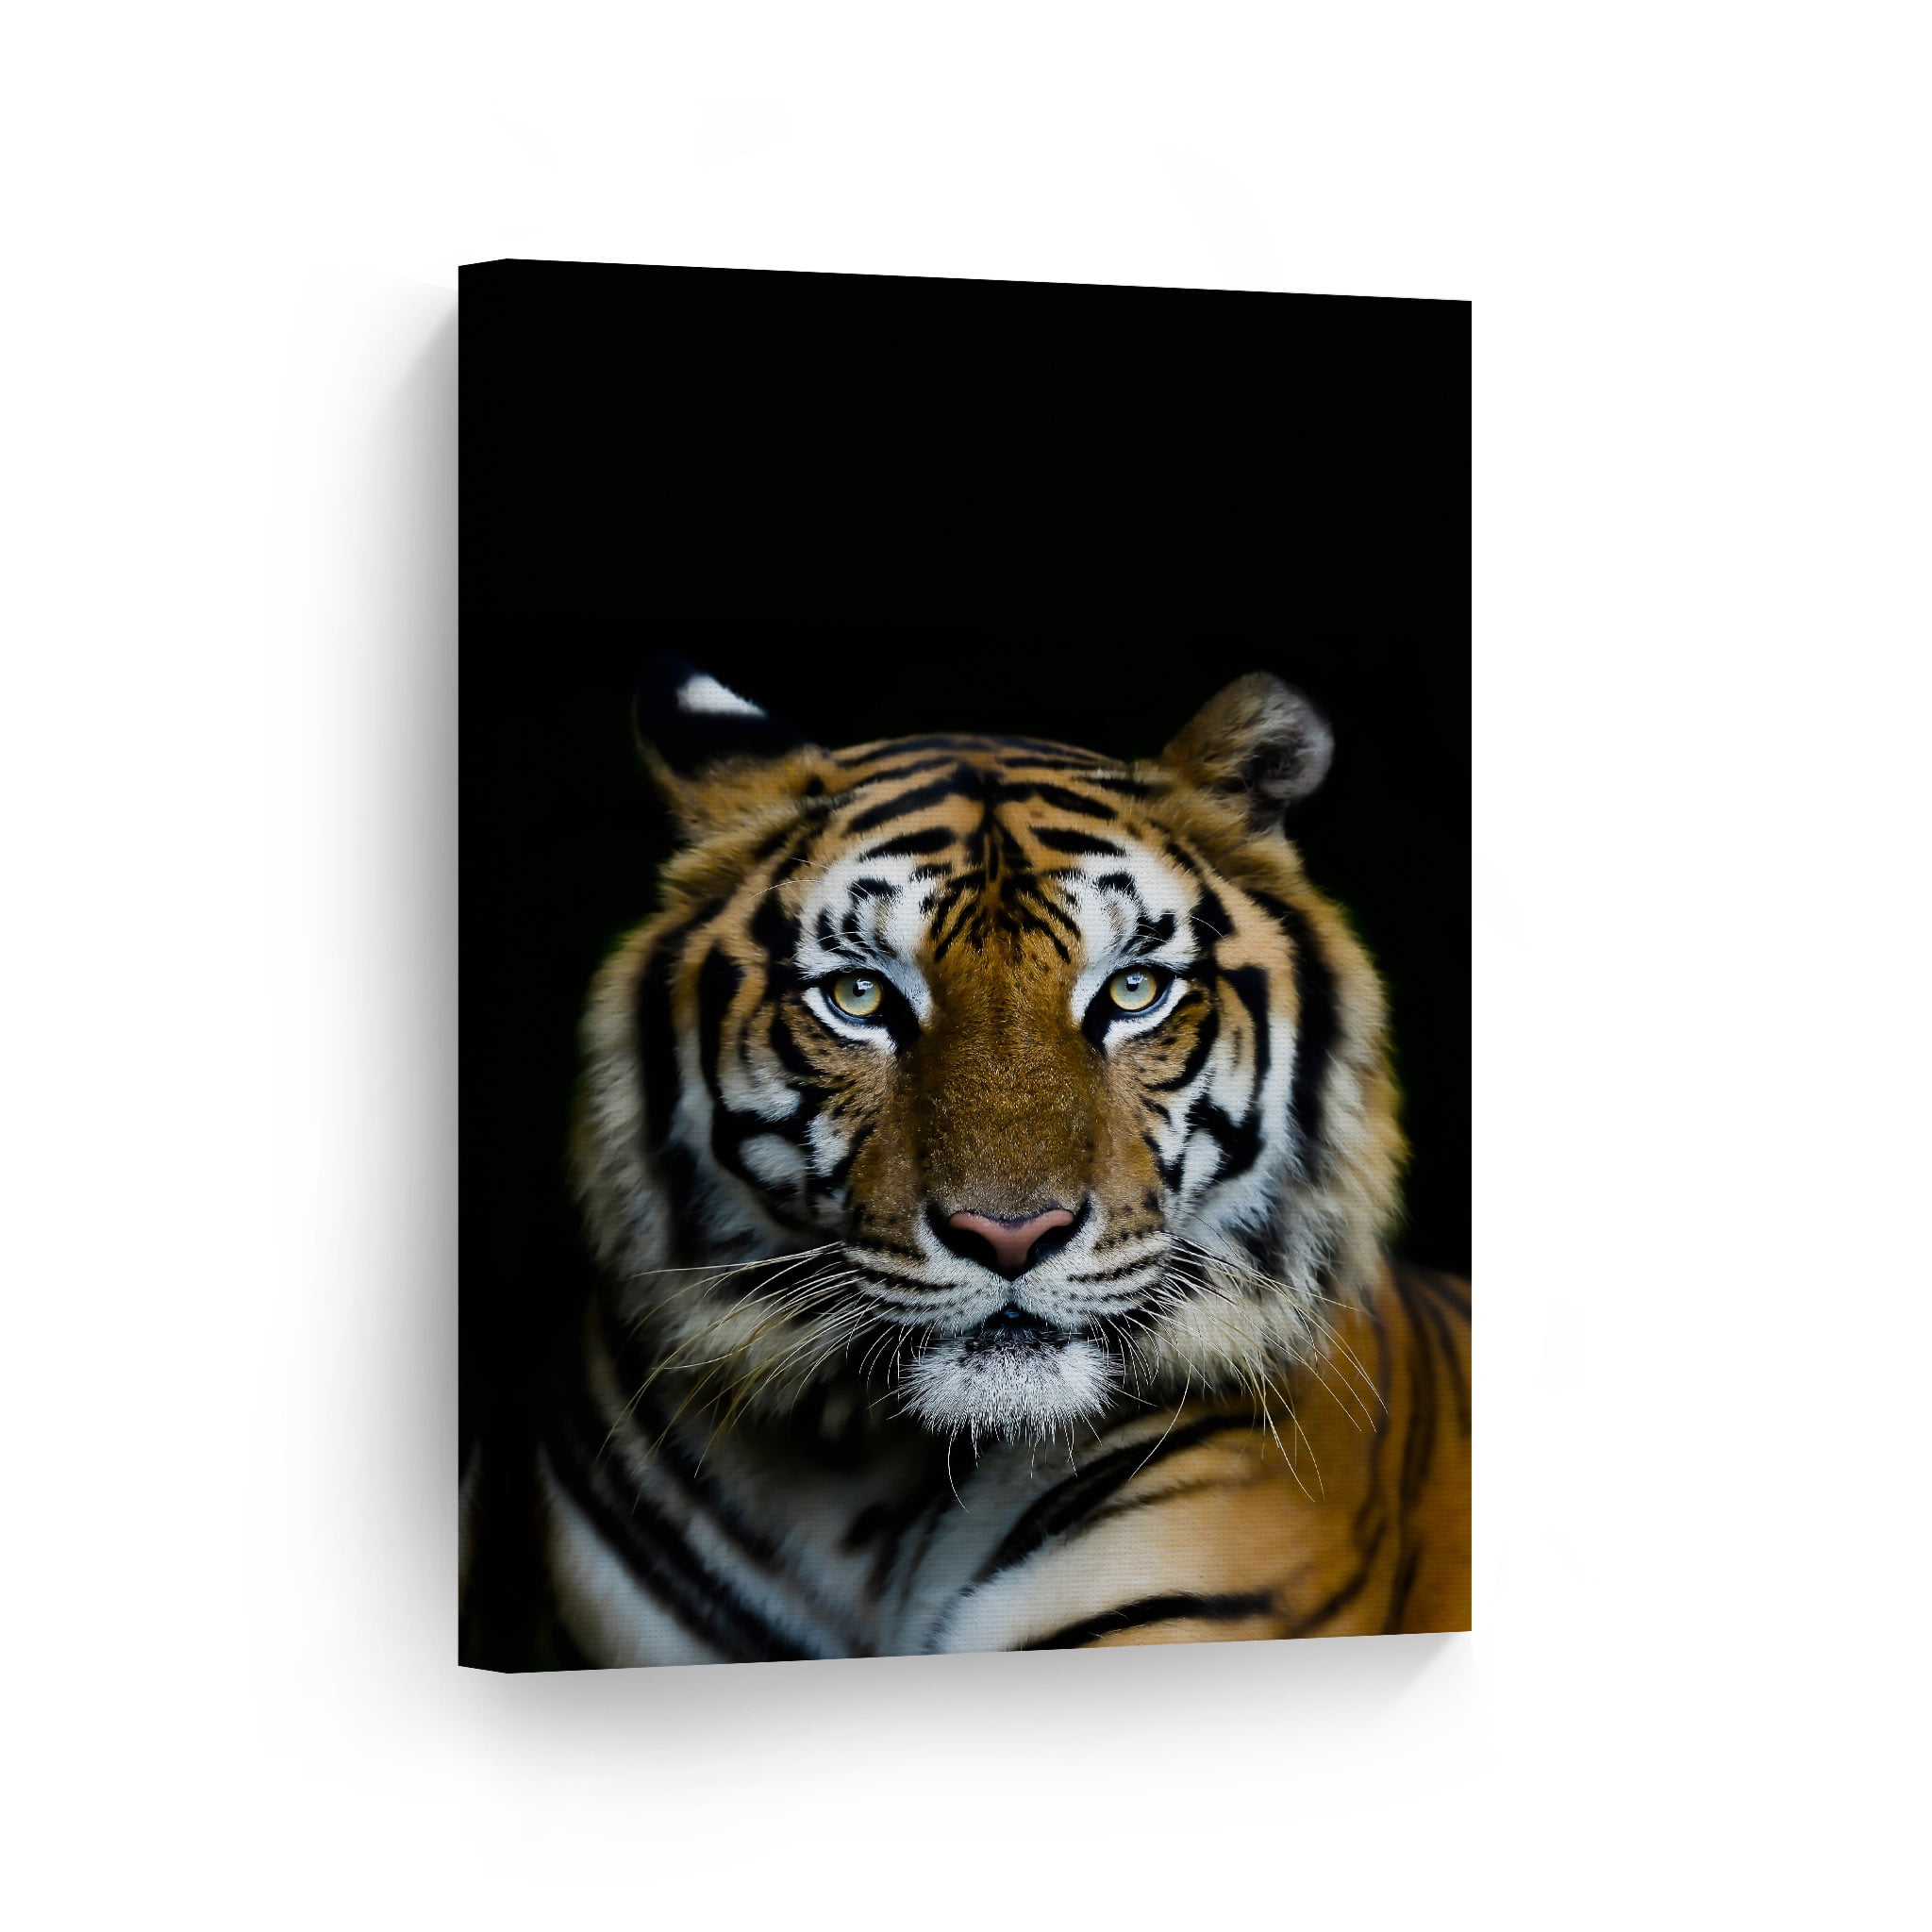 Tiger In Snow Deluxe Printing Small Purse Portable Receiving Bag 